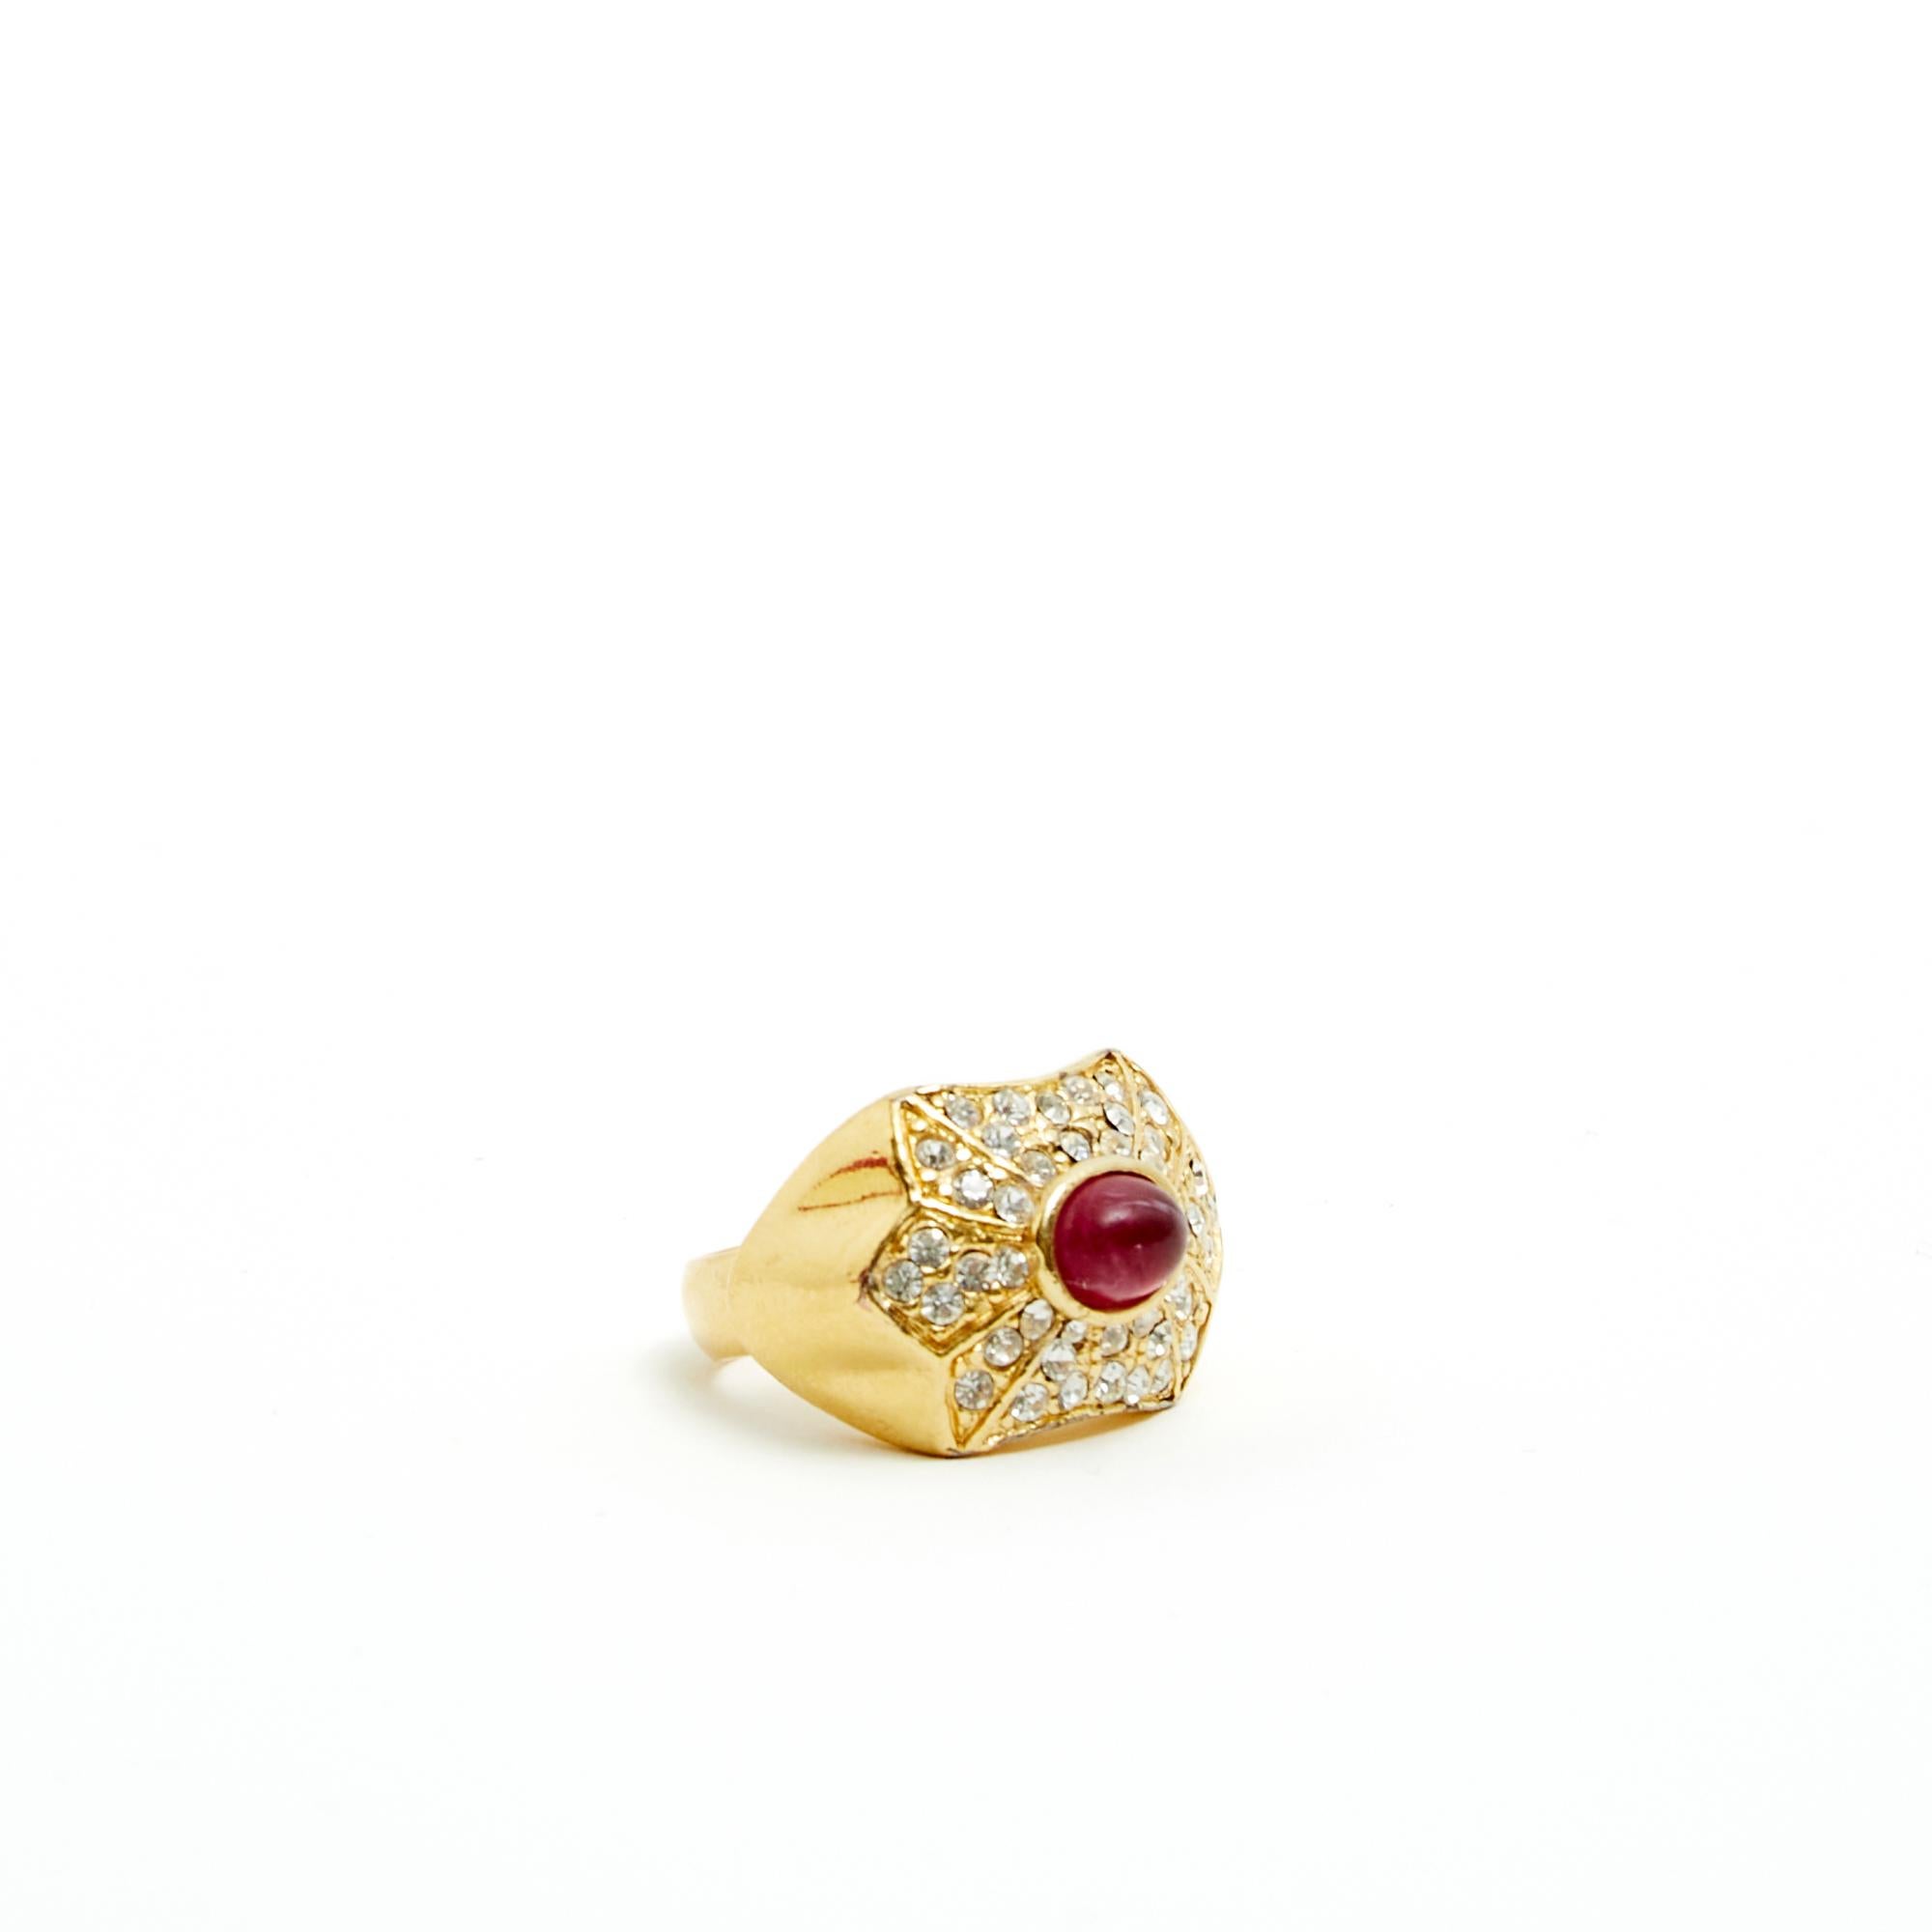 Christian Dior ring circa 1990 Art Deco style in gold metal paved with brilliant-style rhinestones and a stone imitating ruby, signed. Finger size (on ring sizer) 49 or US4.75, internal diameter 1.57 cm, dimensions of the pattern seen from above 2.4